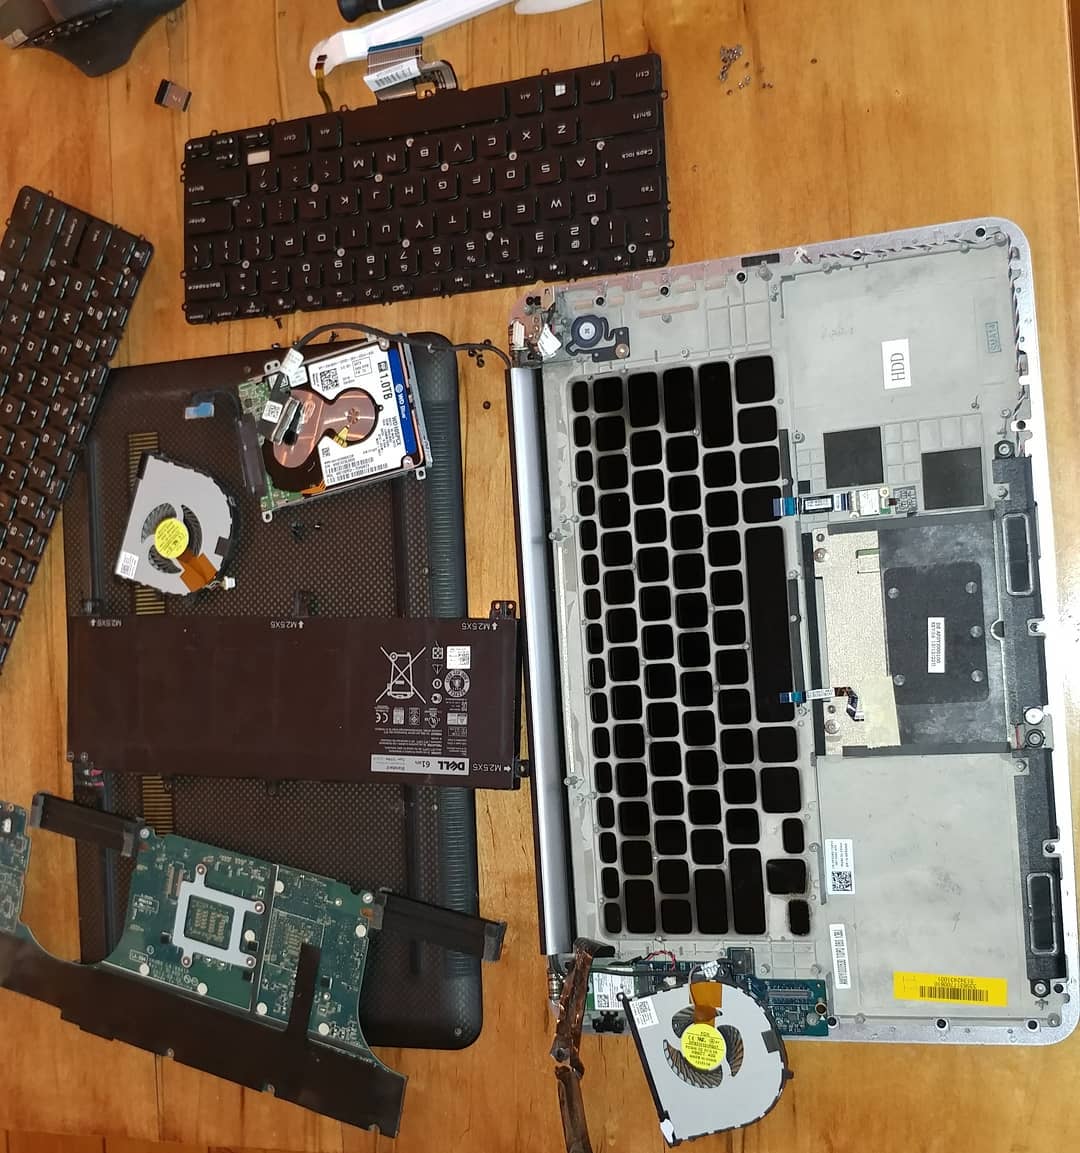 If you love something, take it apart. If it works when you put it back together then it's probably still indifferent to your existence but you might save a couple grand on a new laptop.